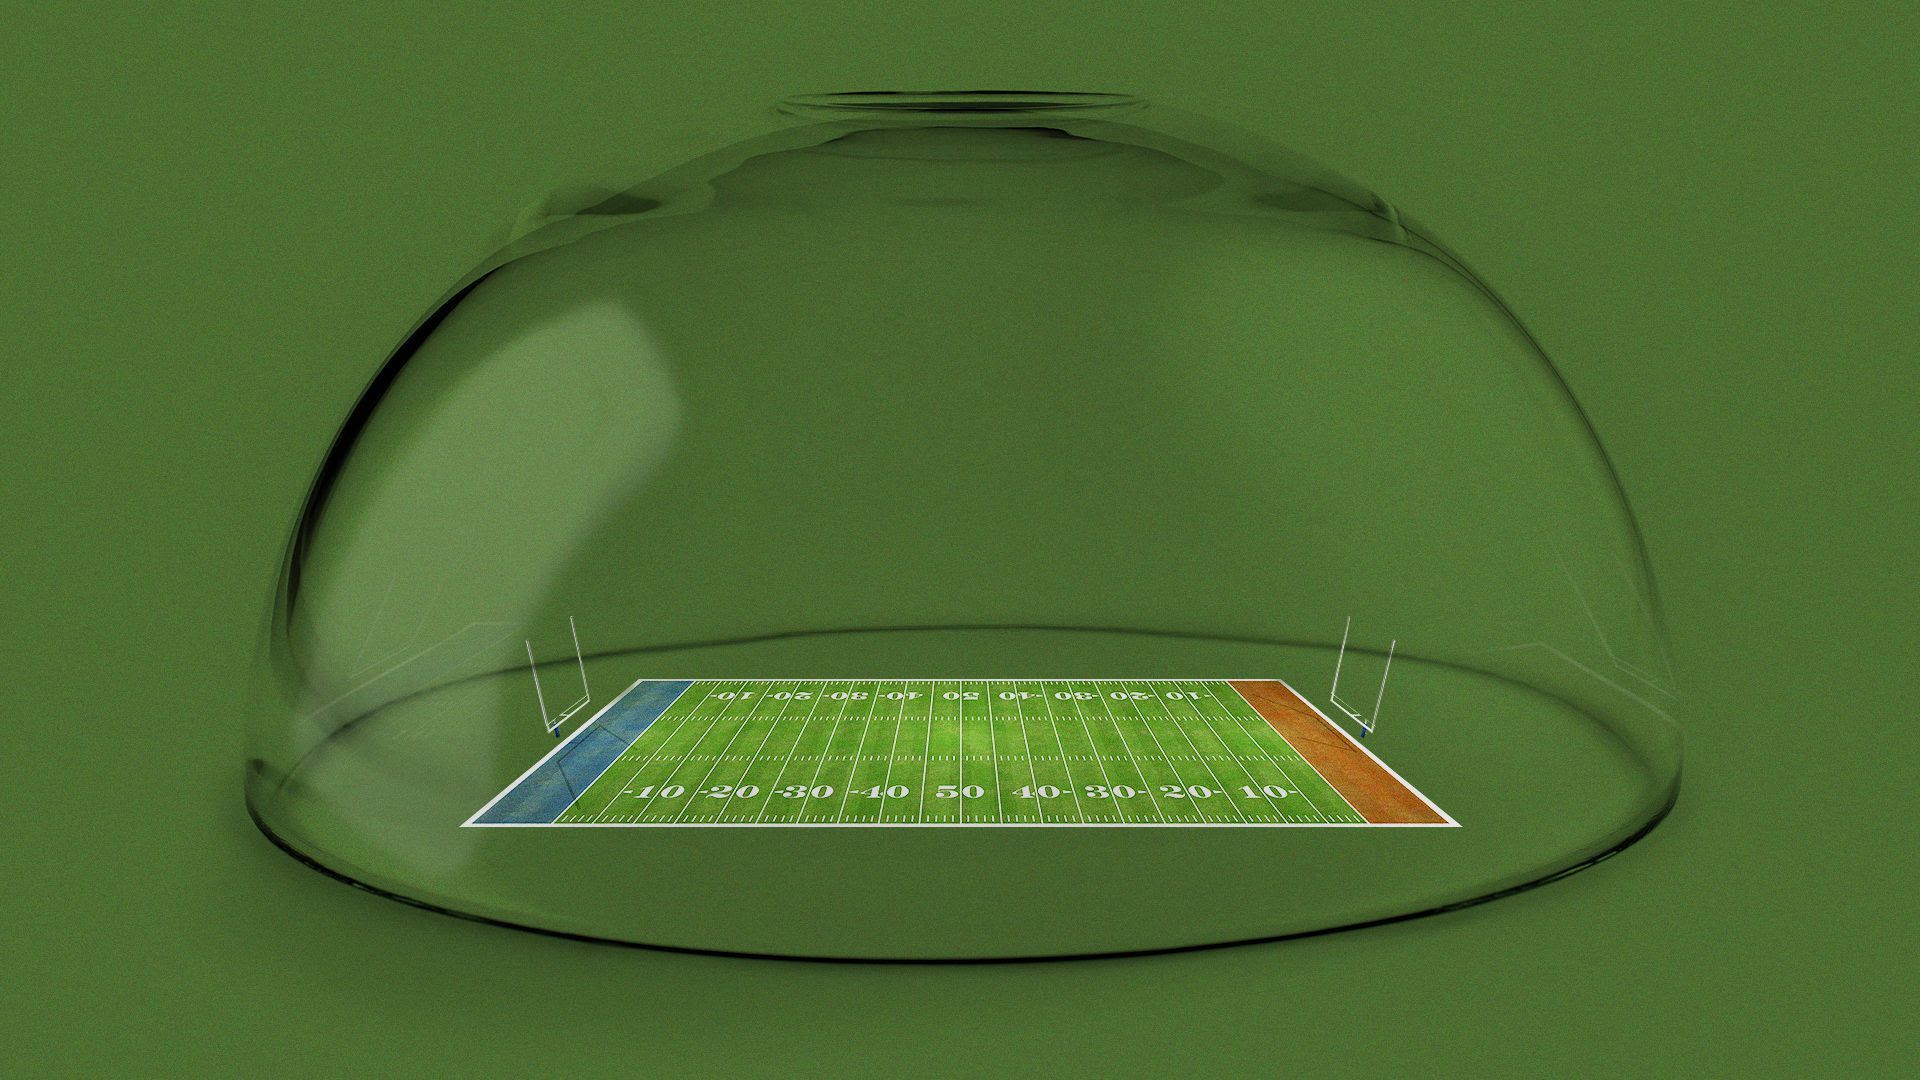 An illustration of a stadium in a quarantine glass.